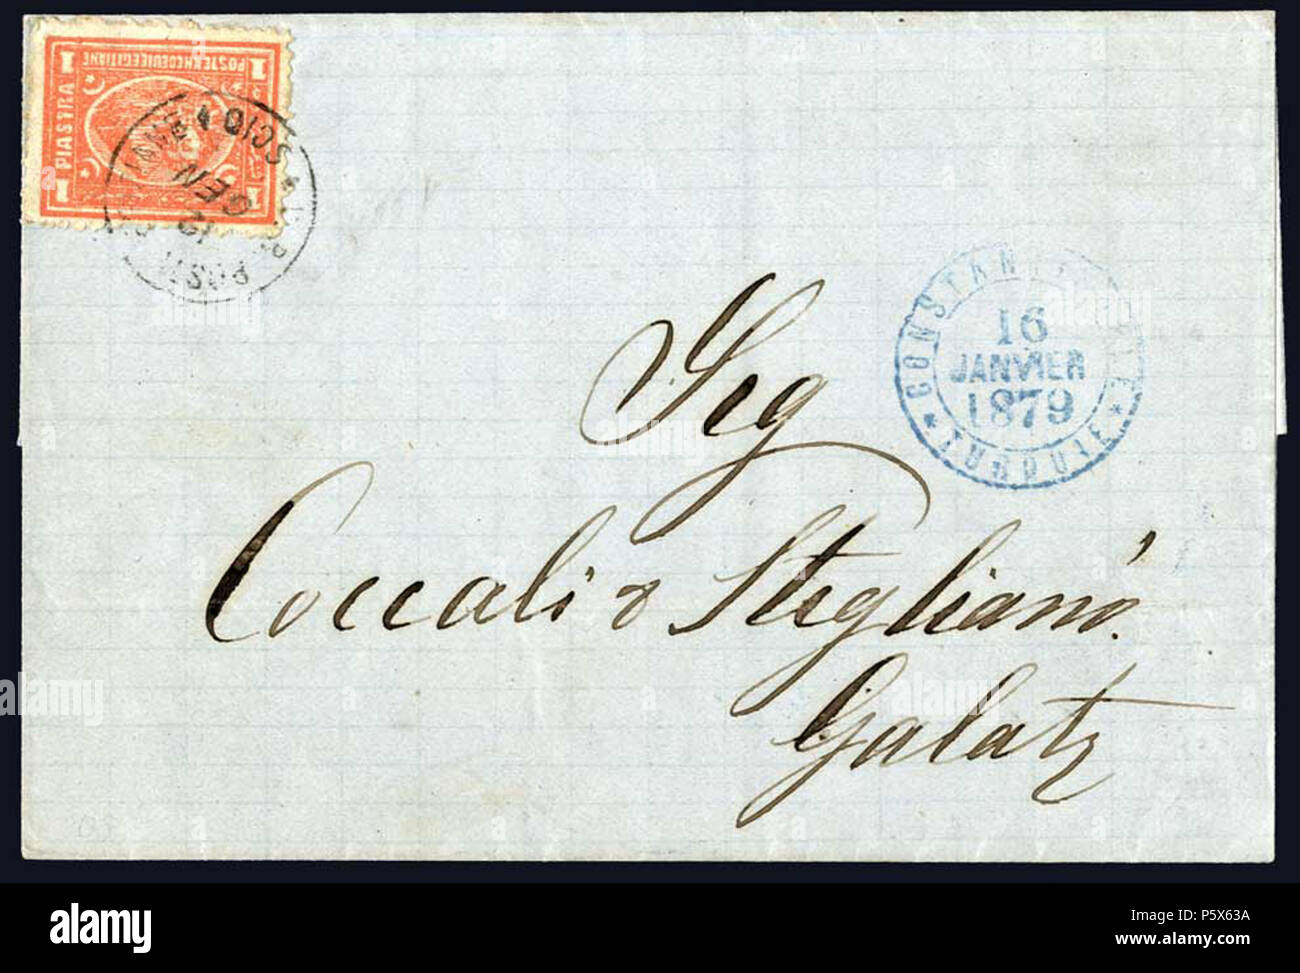 N/A. English: Letter mailed at the Egyptian post office at Chios in 1879. Chios was part of the Ottoman Empire until its annexation to Greece in 1912. The letter, franked with a regular Egyptian stamp is cancelled by 'V.R. Posta Egiziane Scio'. The letter was routed to the Egyptian post office in Constantinople, transferred to the French post office there, sent by steamer to Odessa, and from there sent by rail to Galatz in Moldavia, Romania. 11 October 2014, 12:01:50. Letter mailed in 1879 497 Egypt P. O. Chios 1879 Stock Photo